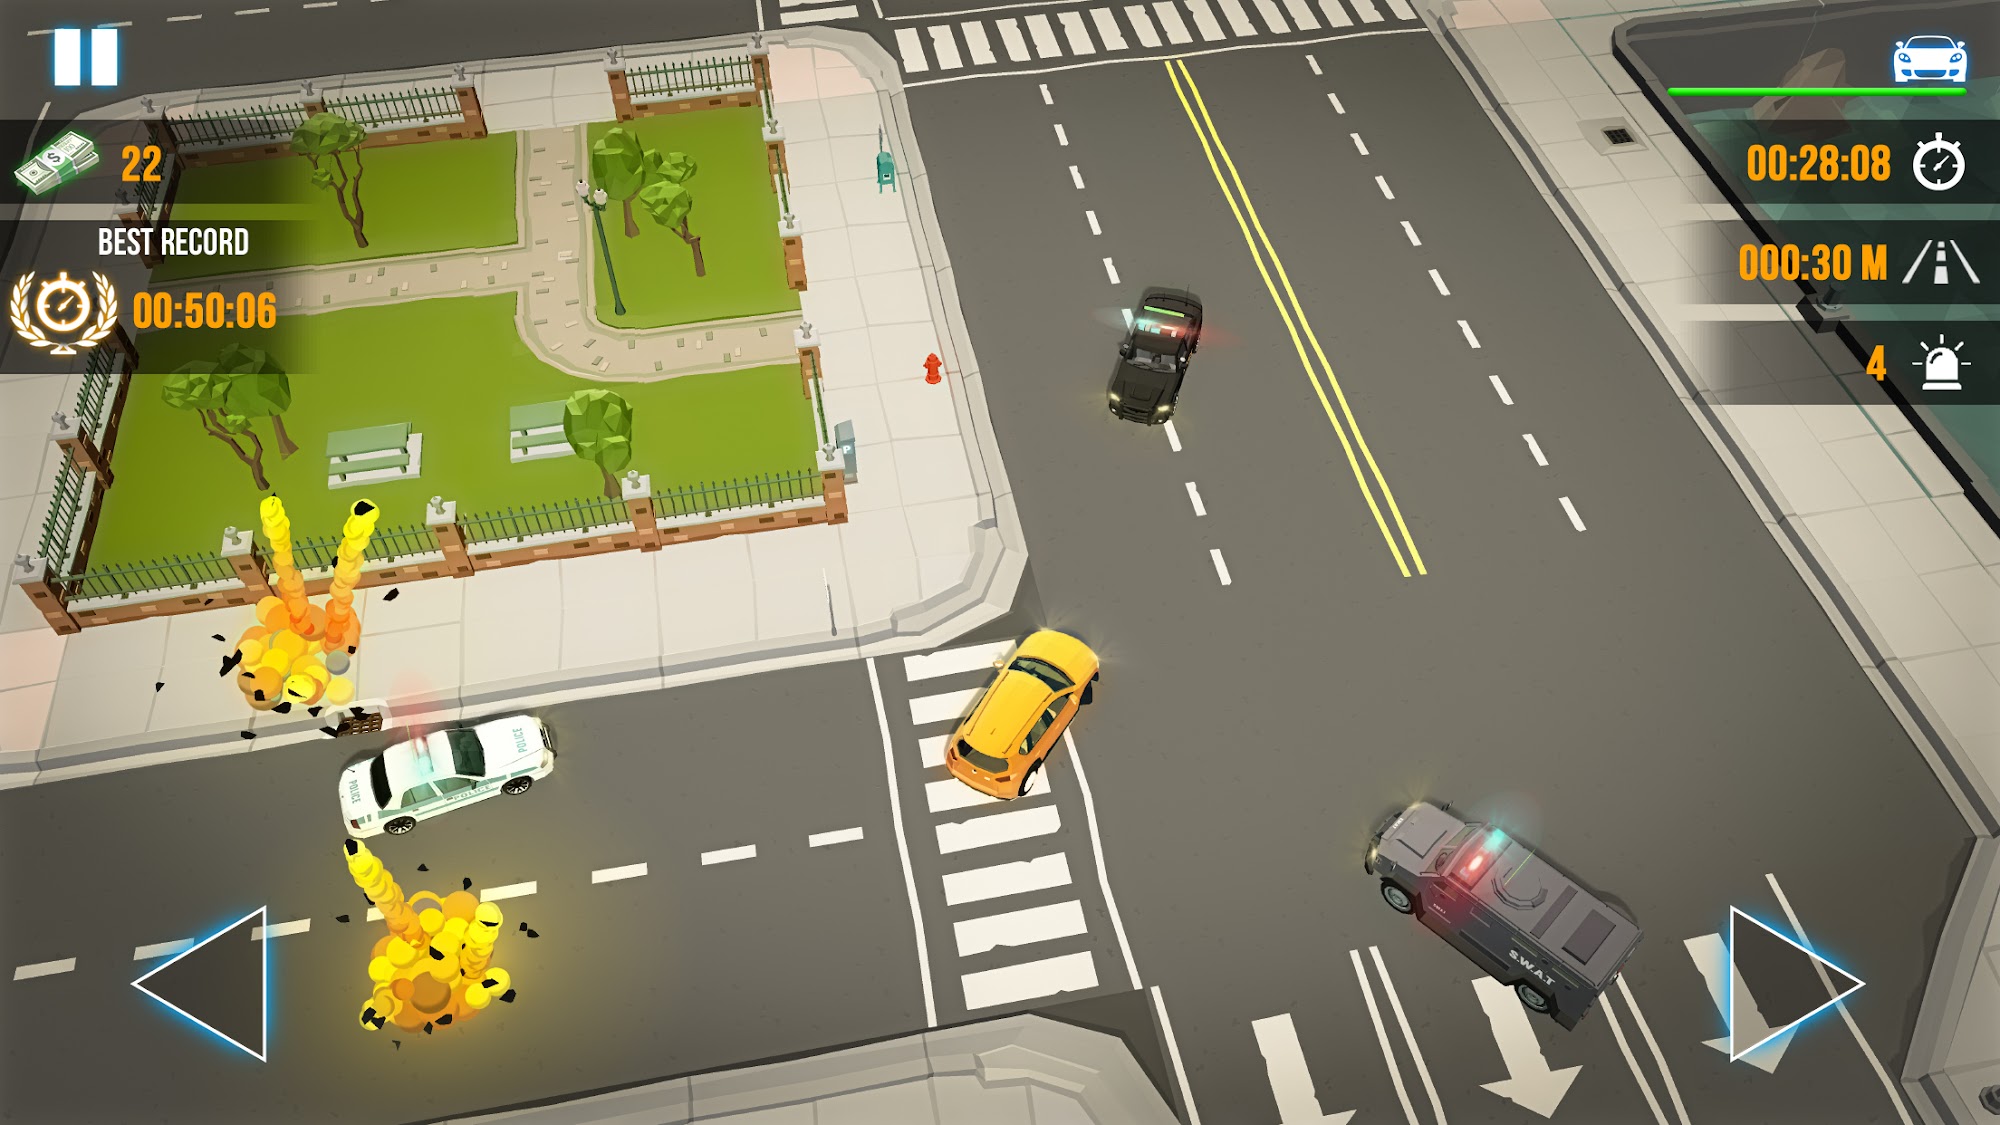 Gameplay of the Chasing Fever: Car Chase Games for Android phone or tablet.